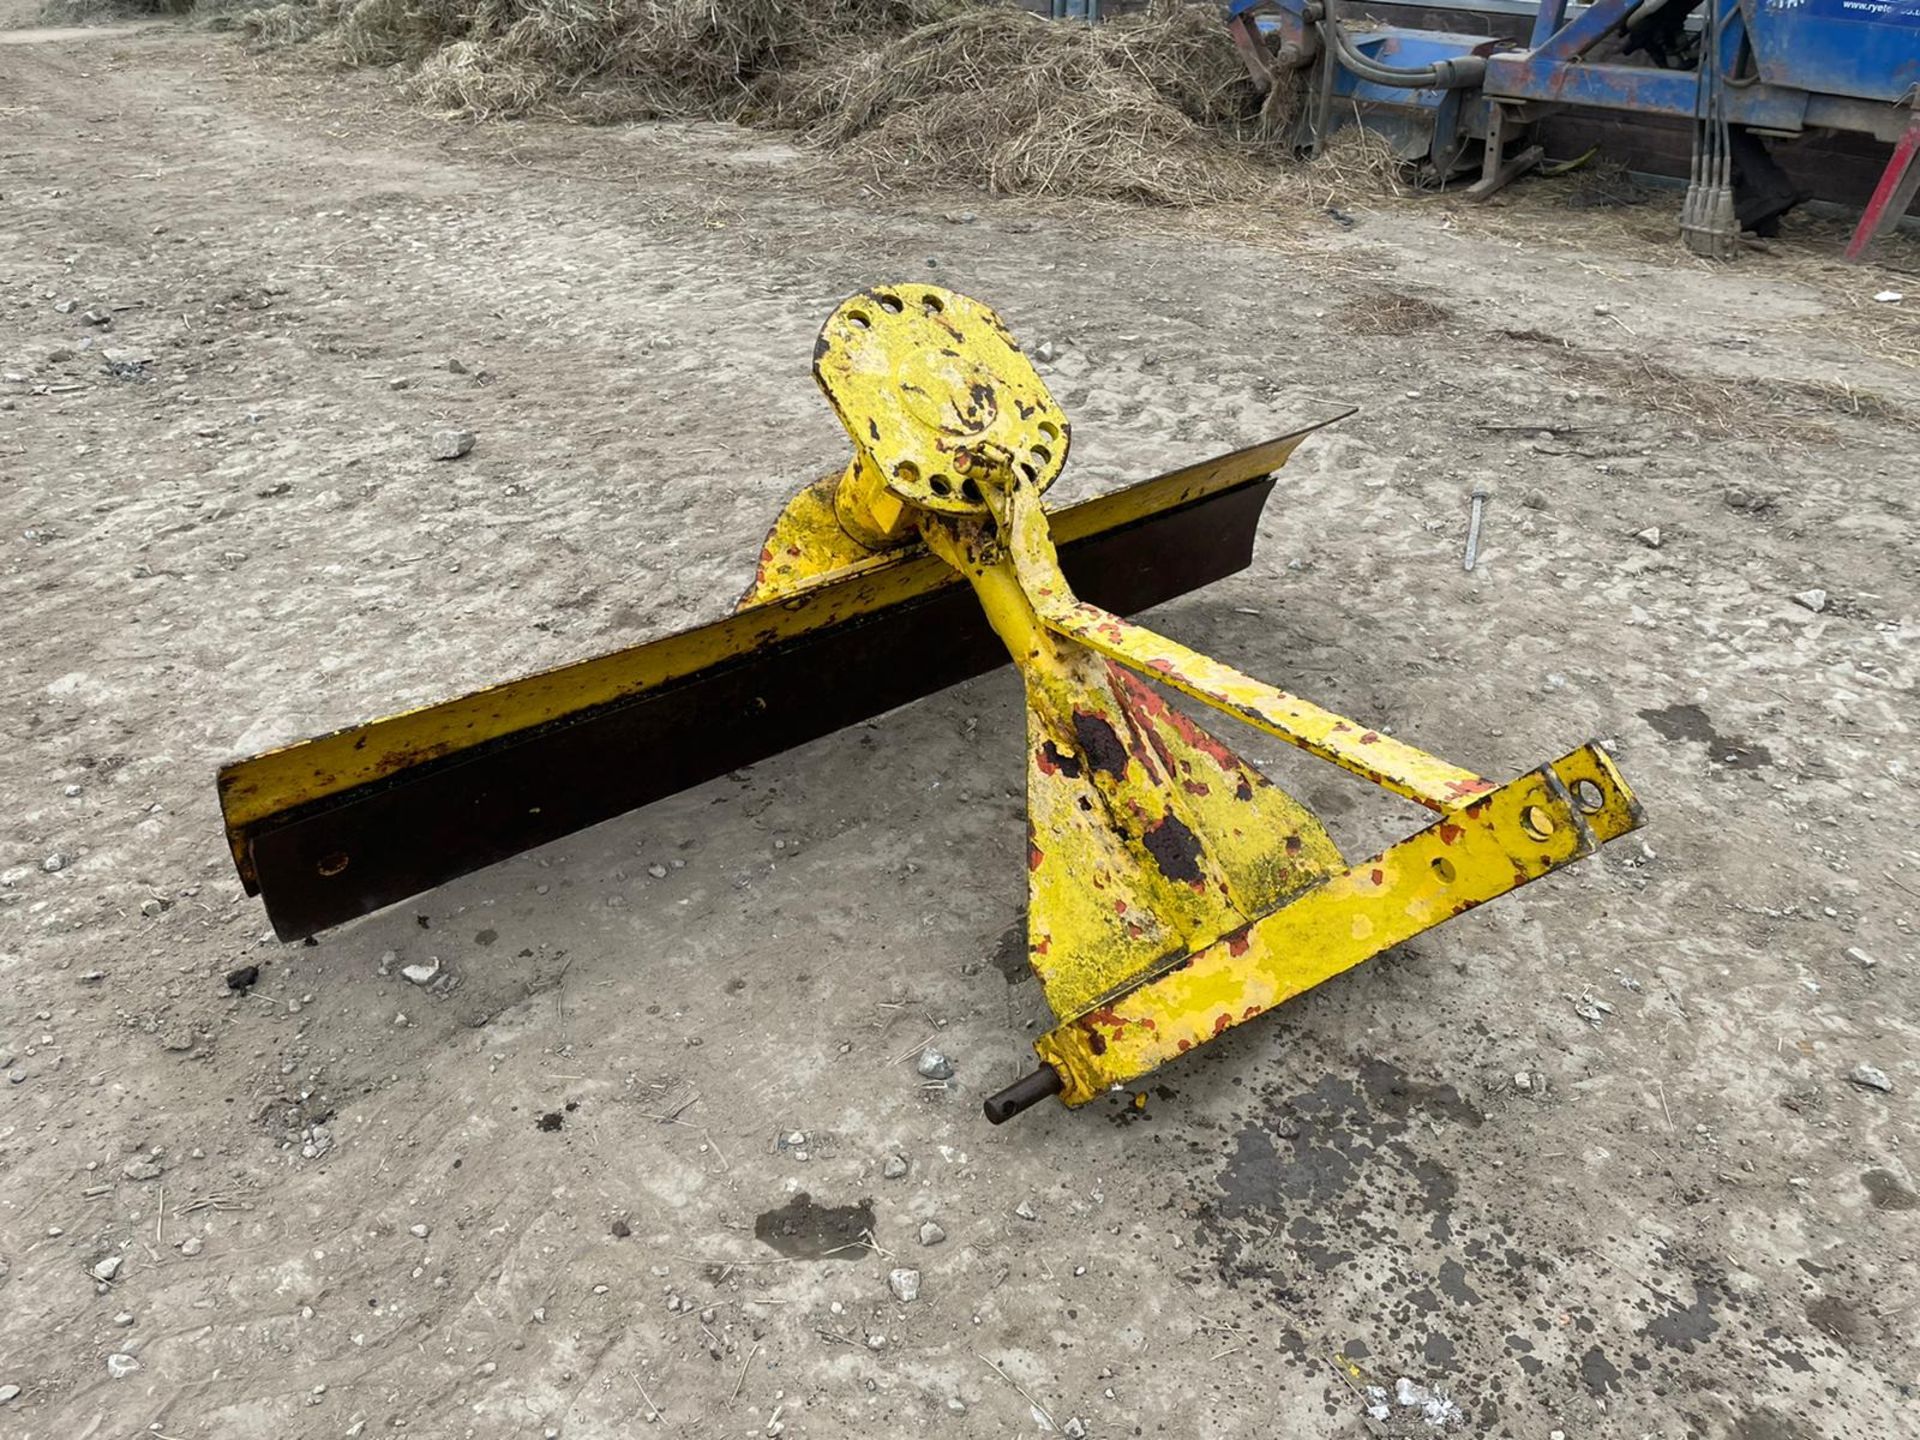 INDEPENDANCE SCRAPER / GRADER, SUITABLE FOR COMPACT TRACTOR, 3 POINT LINKAGE *PLUS VAT* - Image 2 of 4